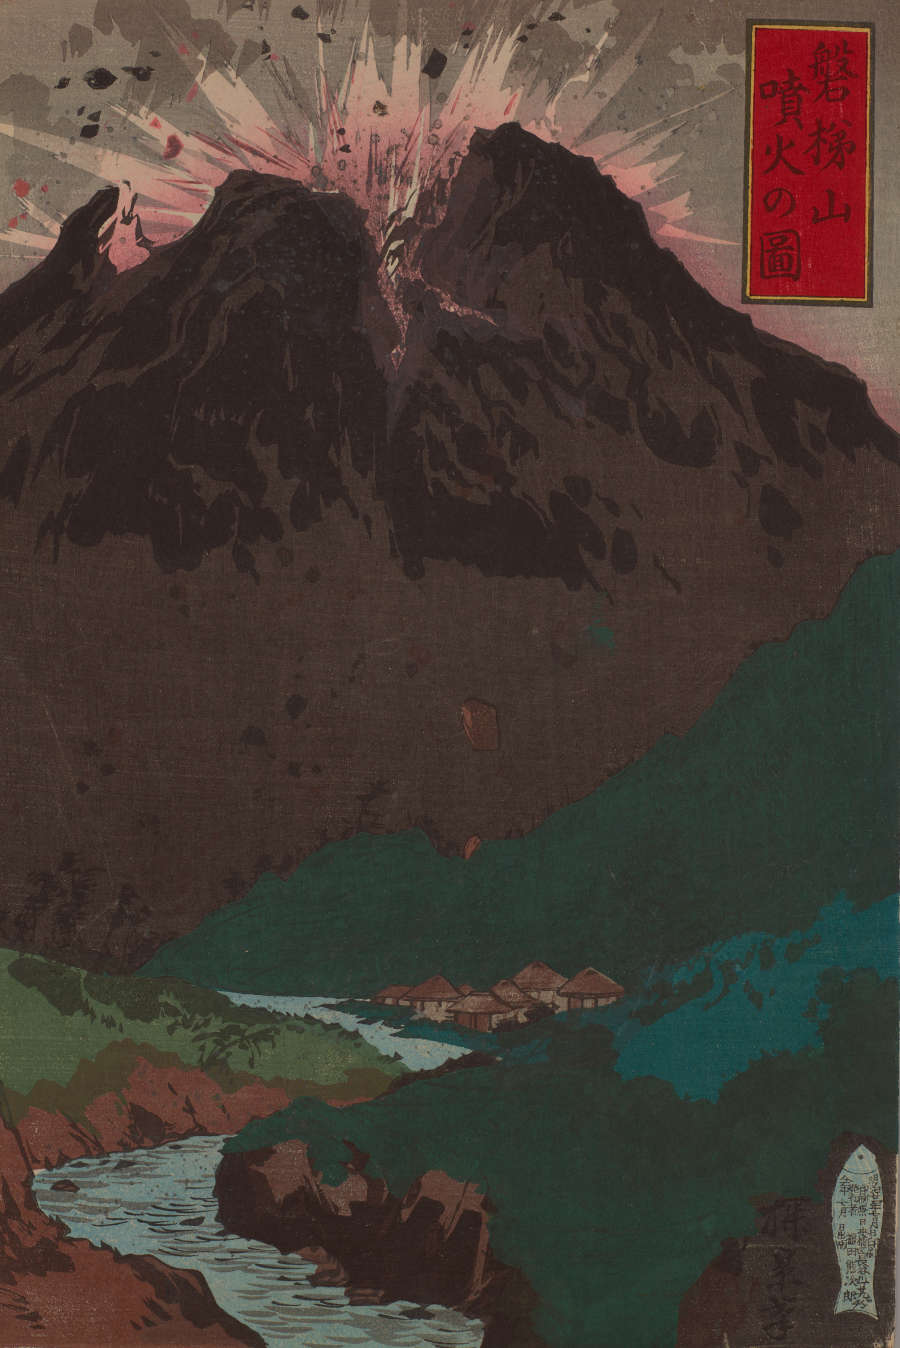 Detail of the rightmost print, showing pink jagged explosions coming out of the mountain’s peak. Beneath is a green terrain with a flowing river, and small houses.